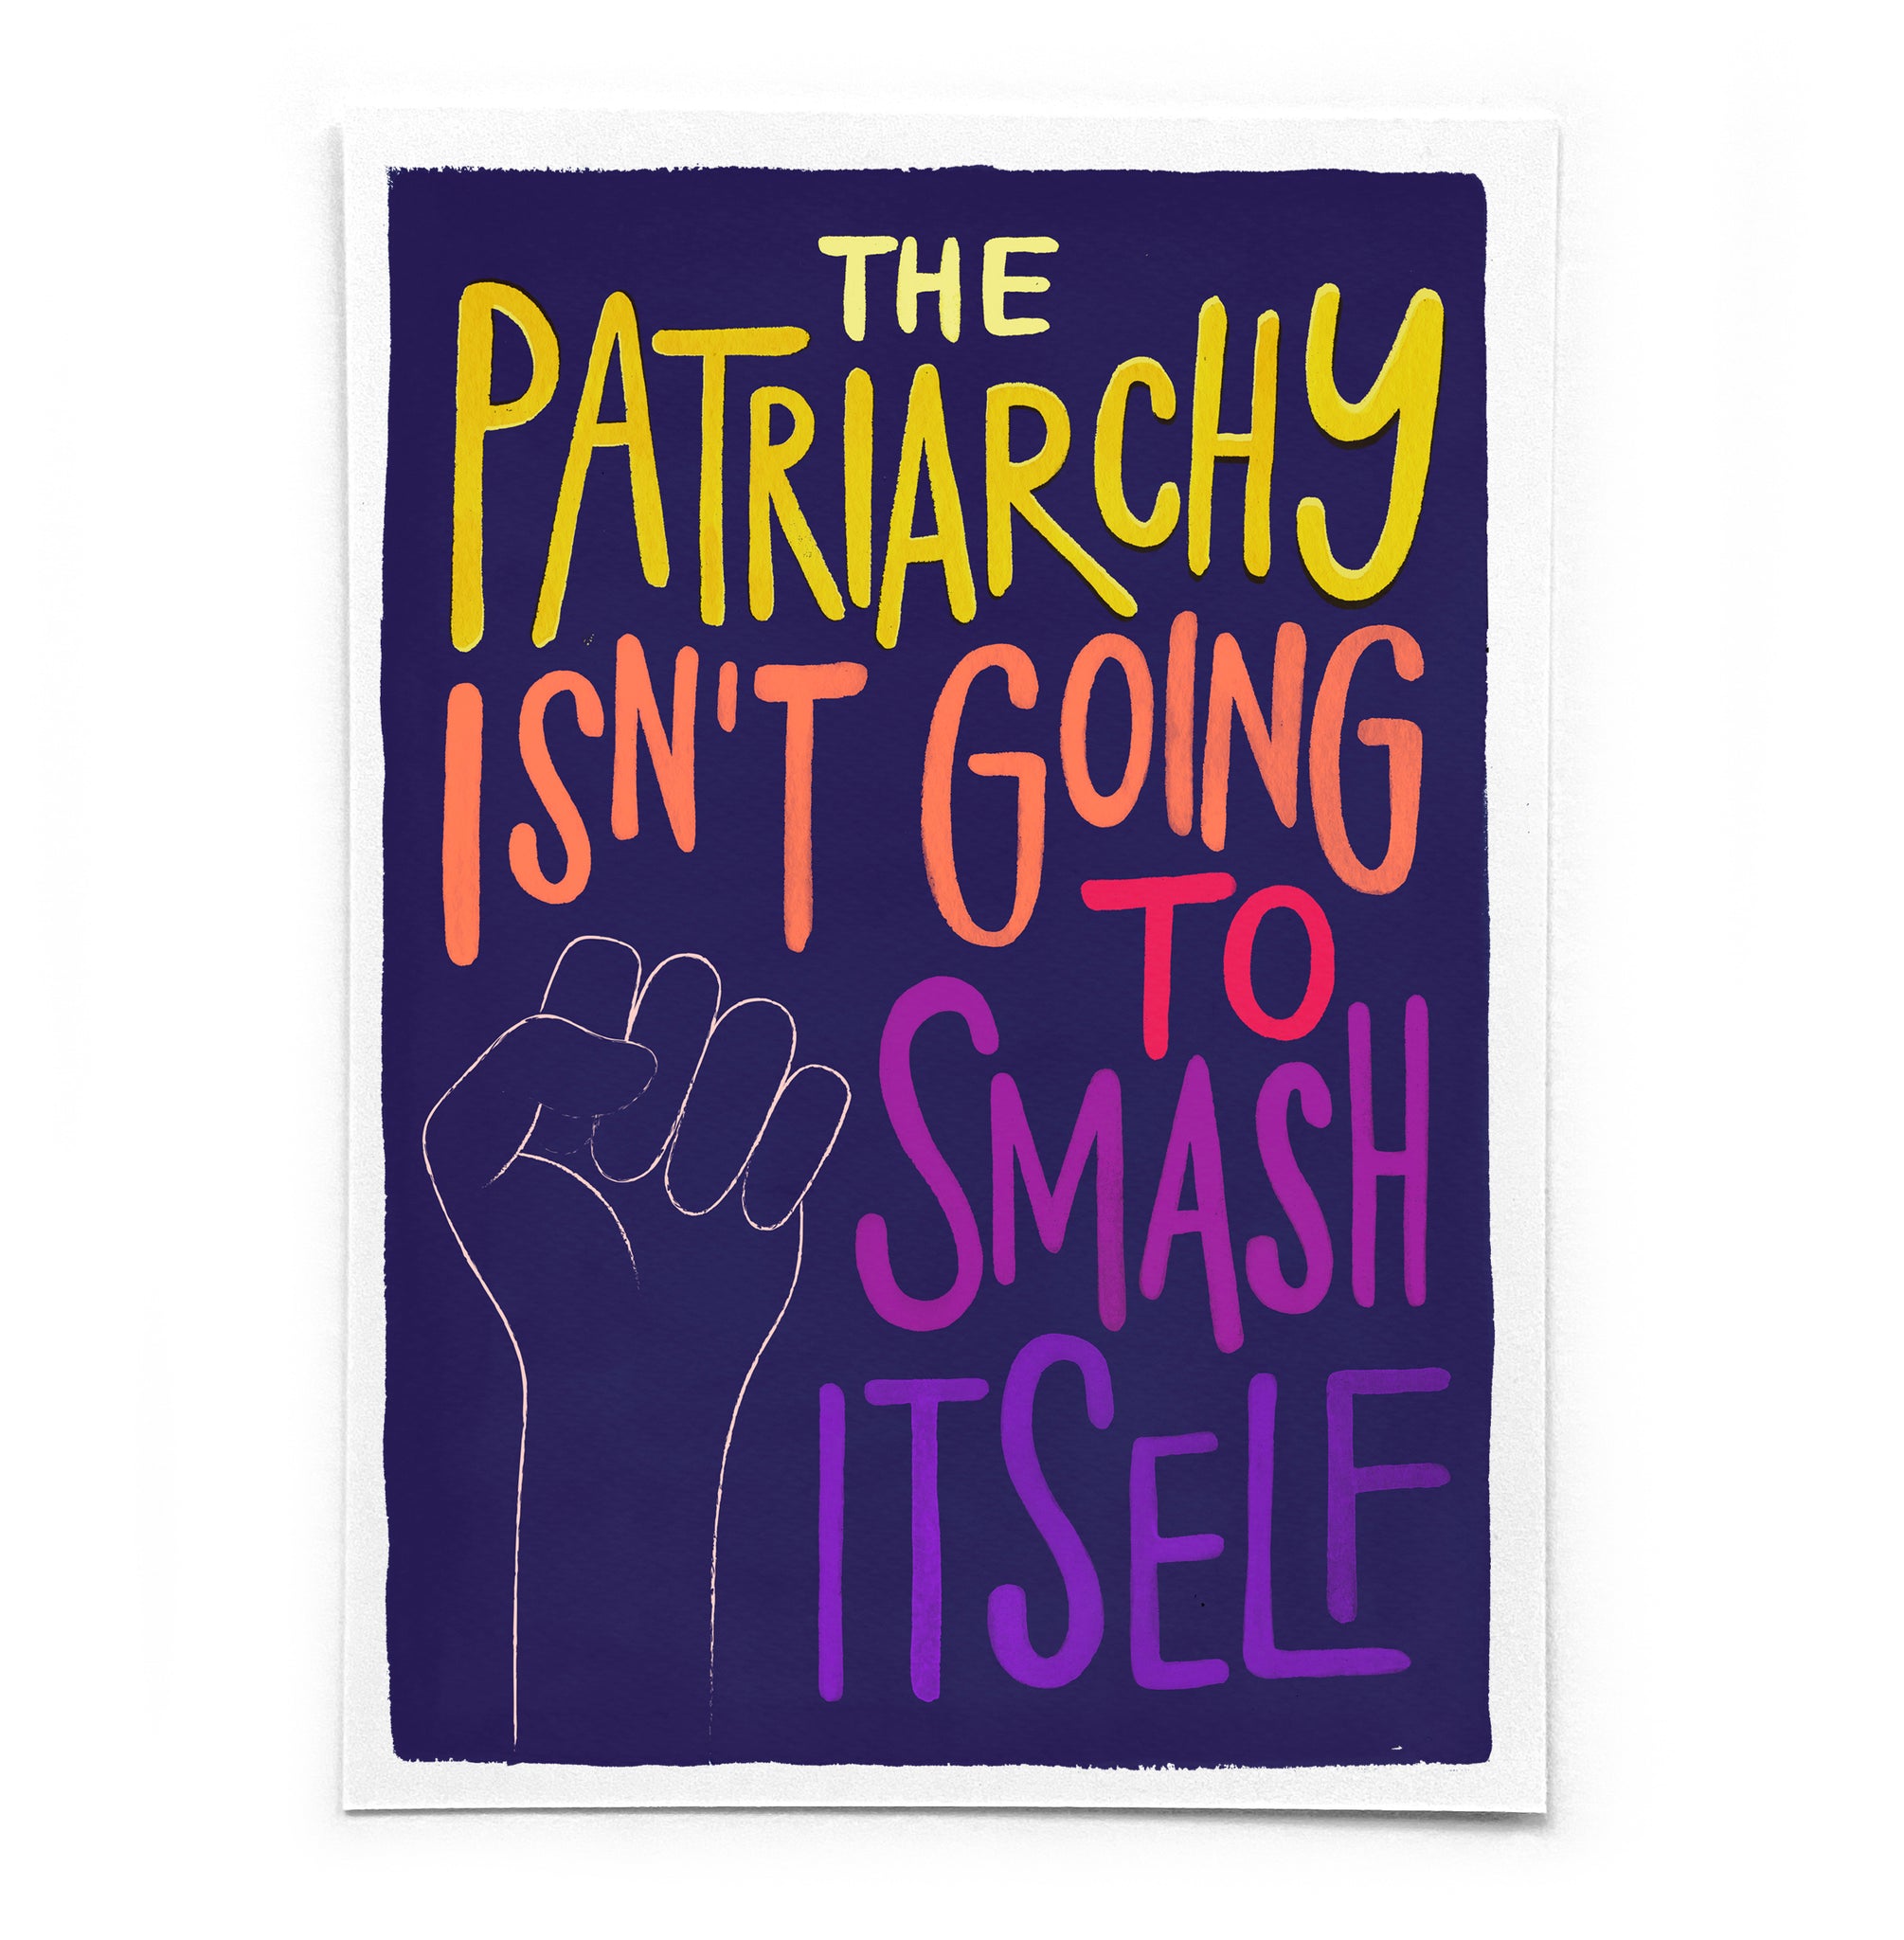 A6 postcard: 'The patriarchy isn't going to smash itself' - printed on recycled card